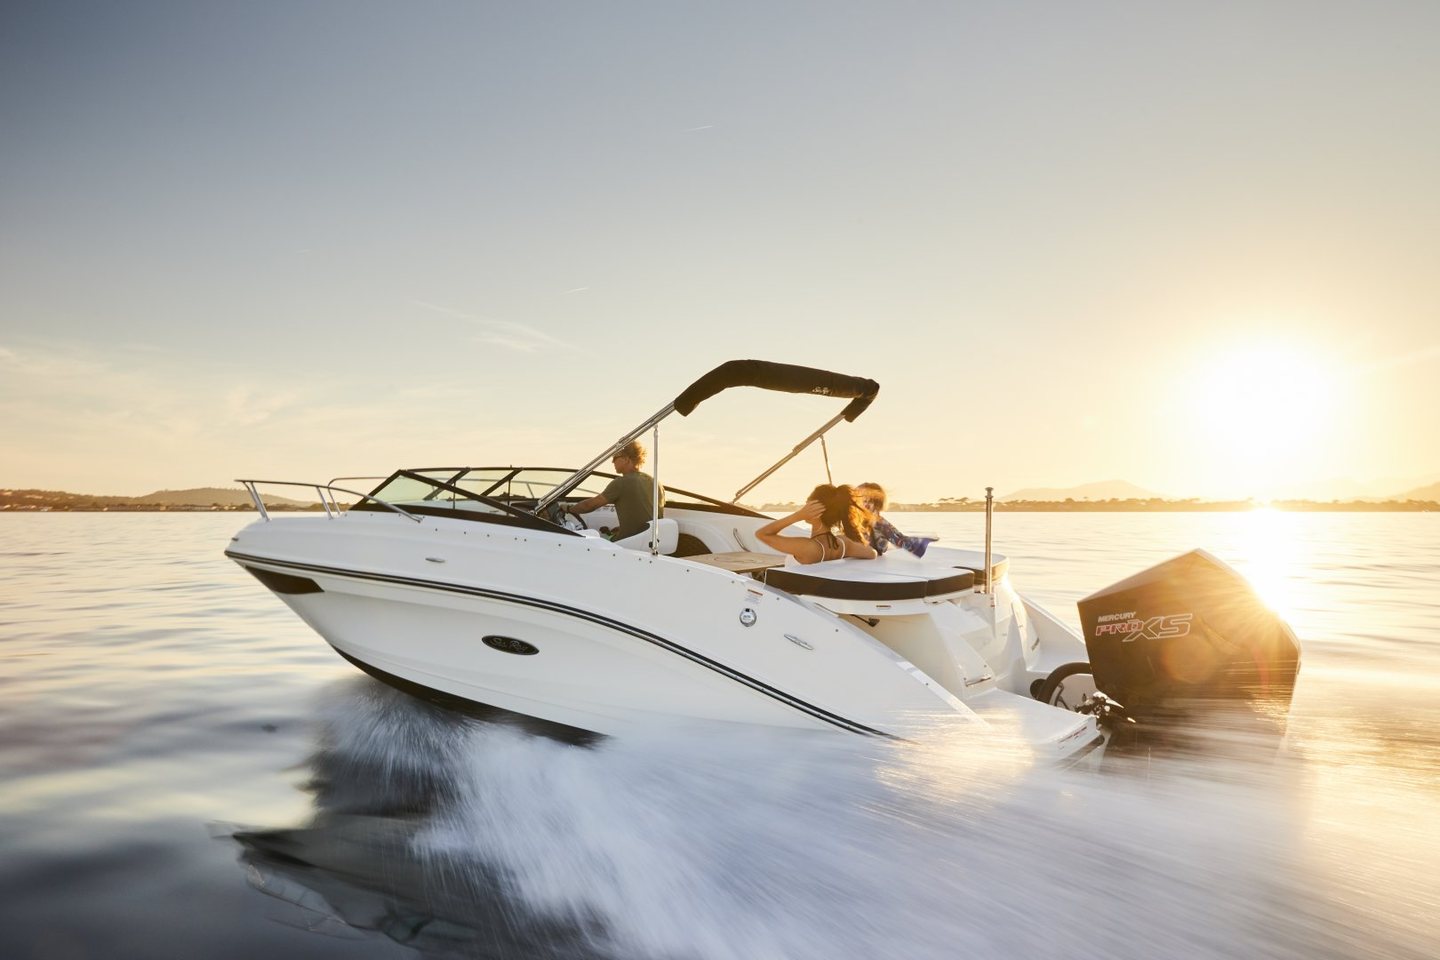 360 VR Virtual Tours of the Sea Ray Sun Sport 230 Outboard